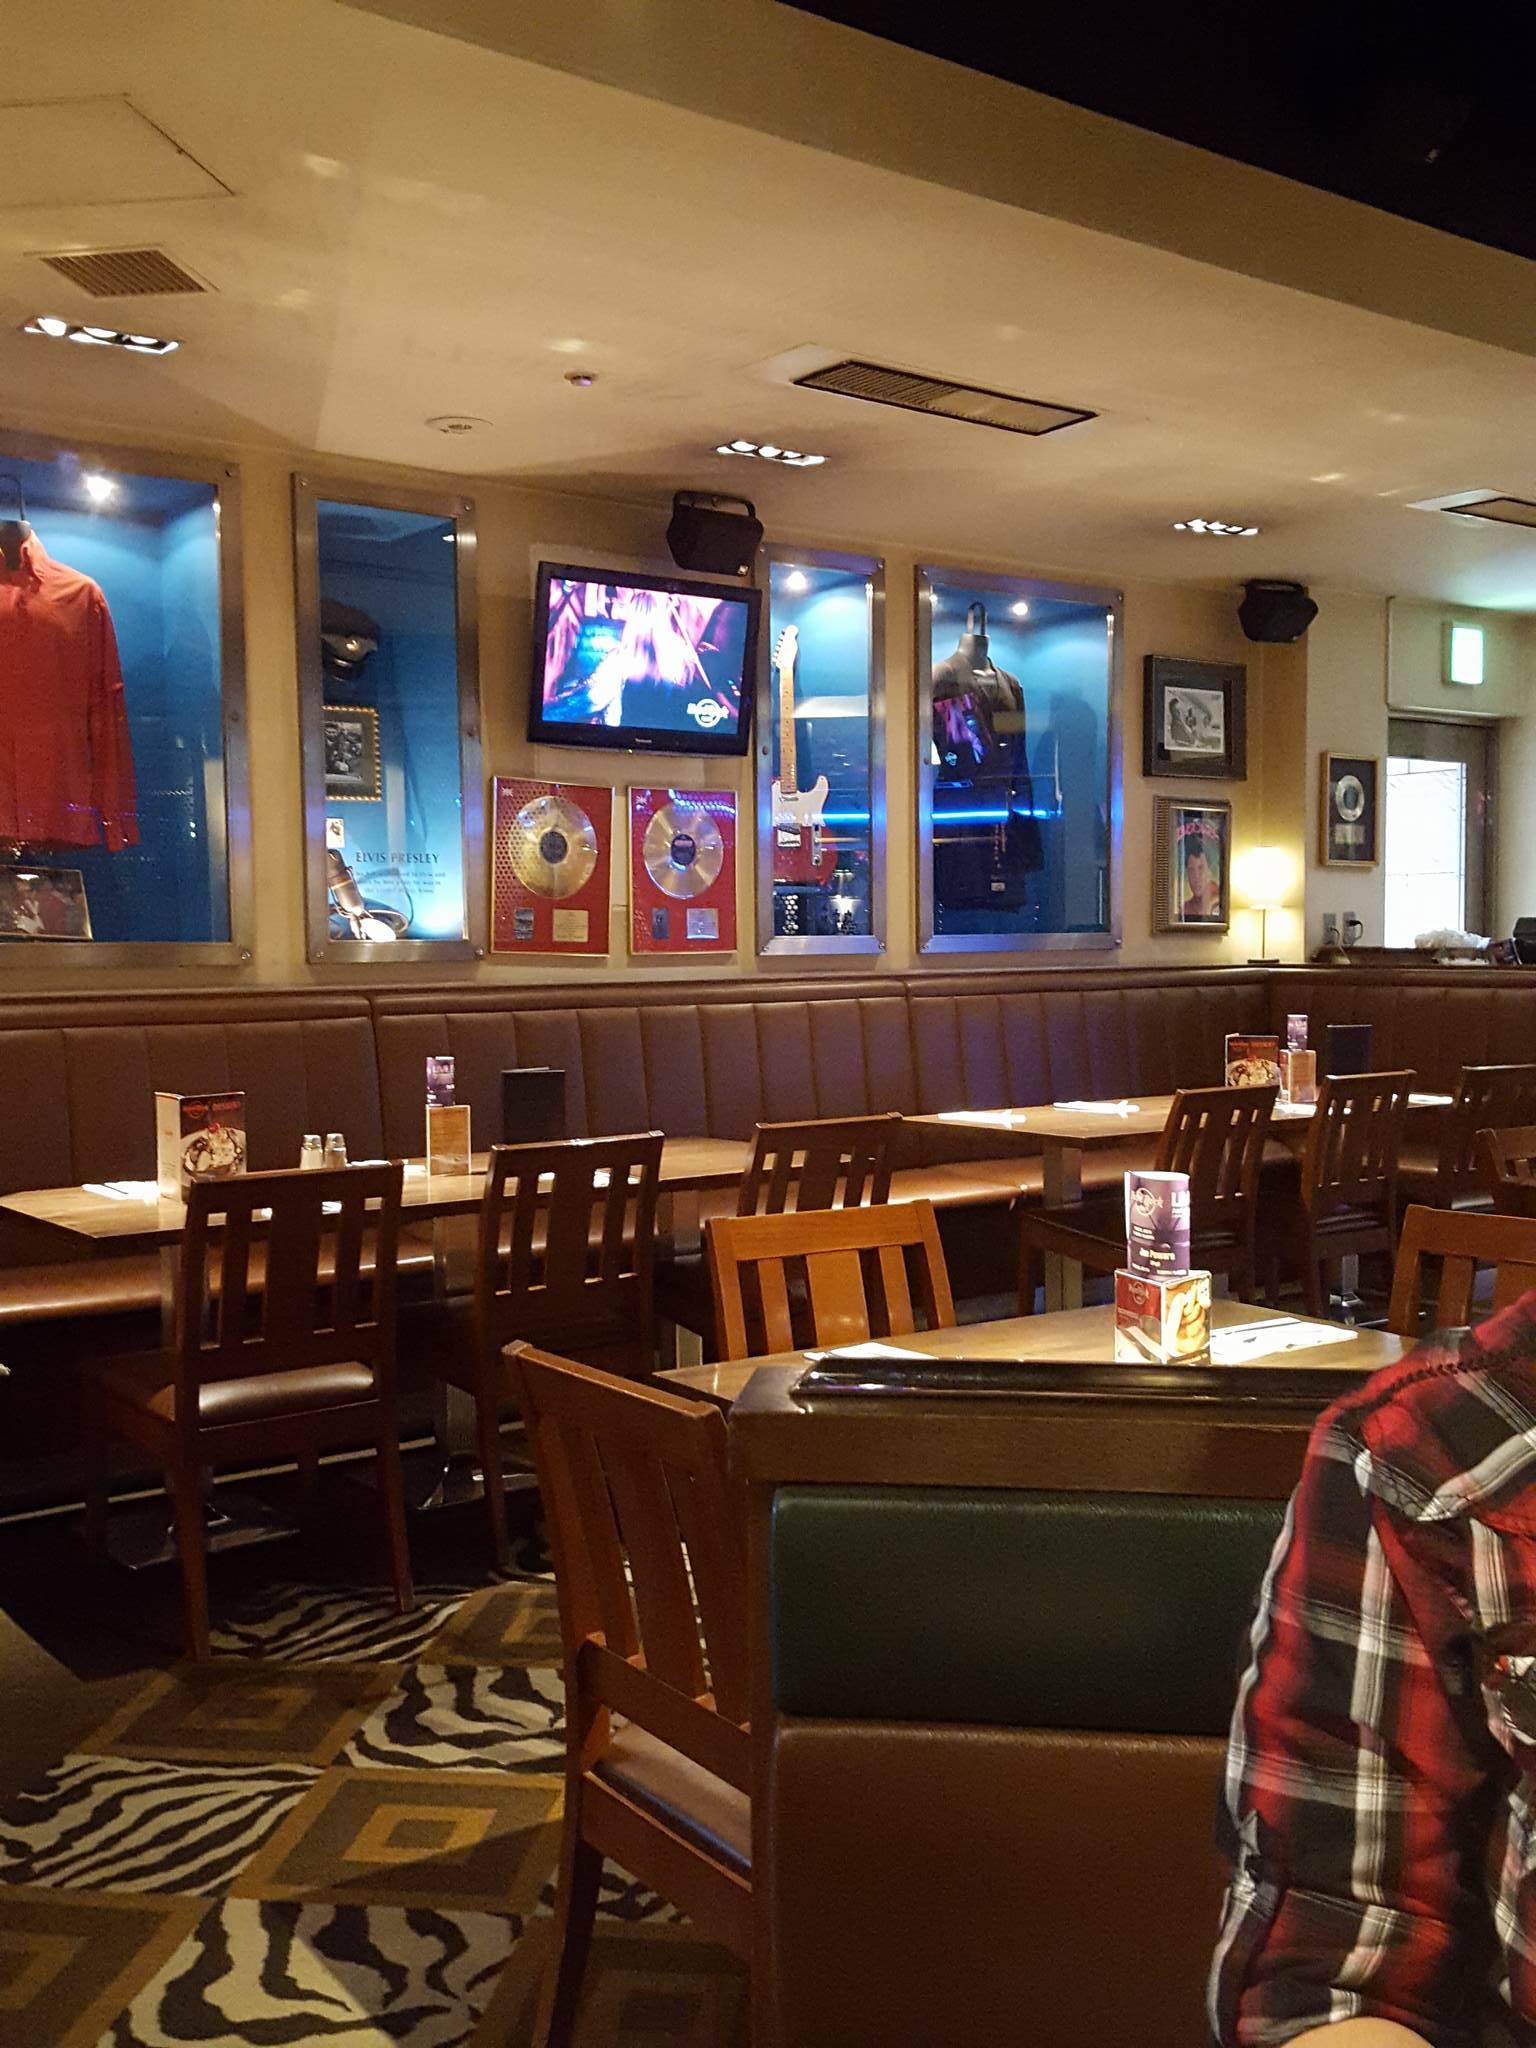 Hard Rock Cafe Osaka! I was surprised to hear a new song by Madonna here.